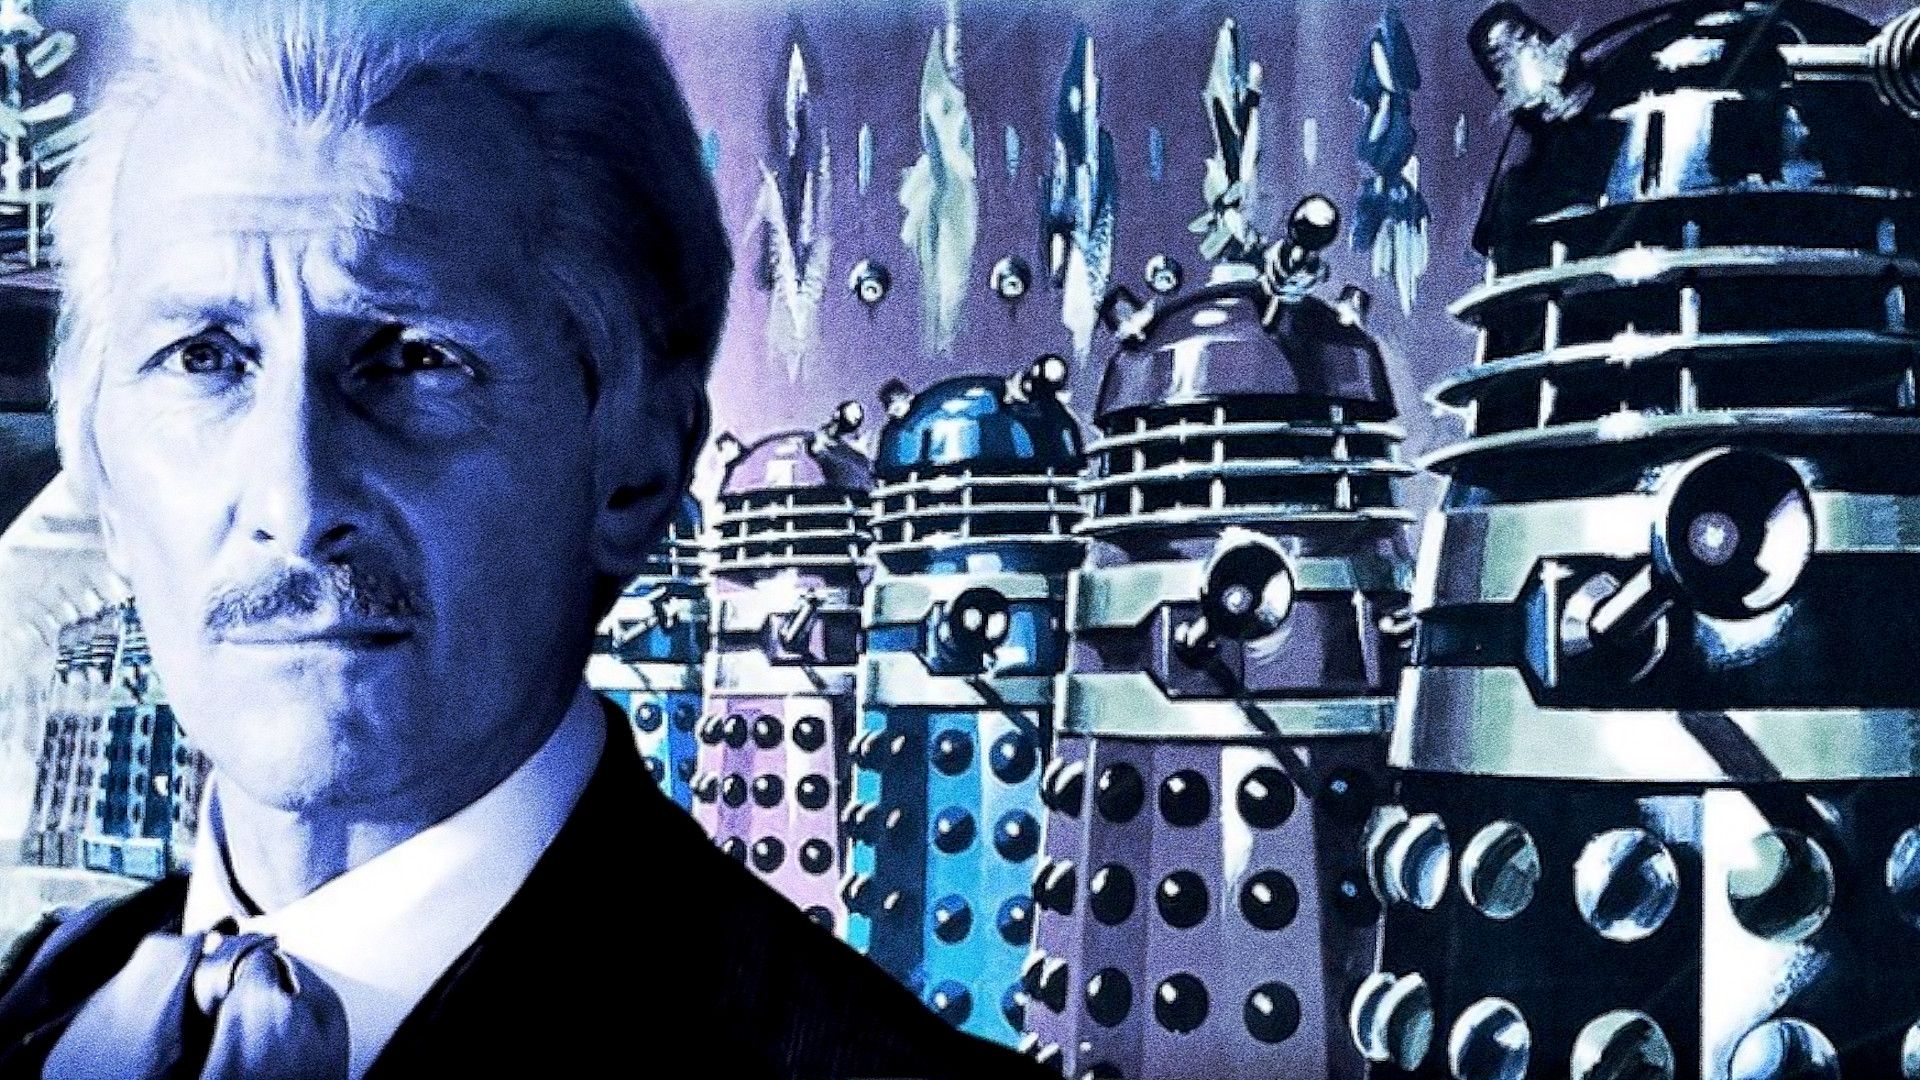 Dr. Who and the Daleks background